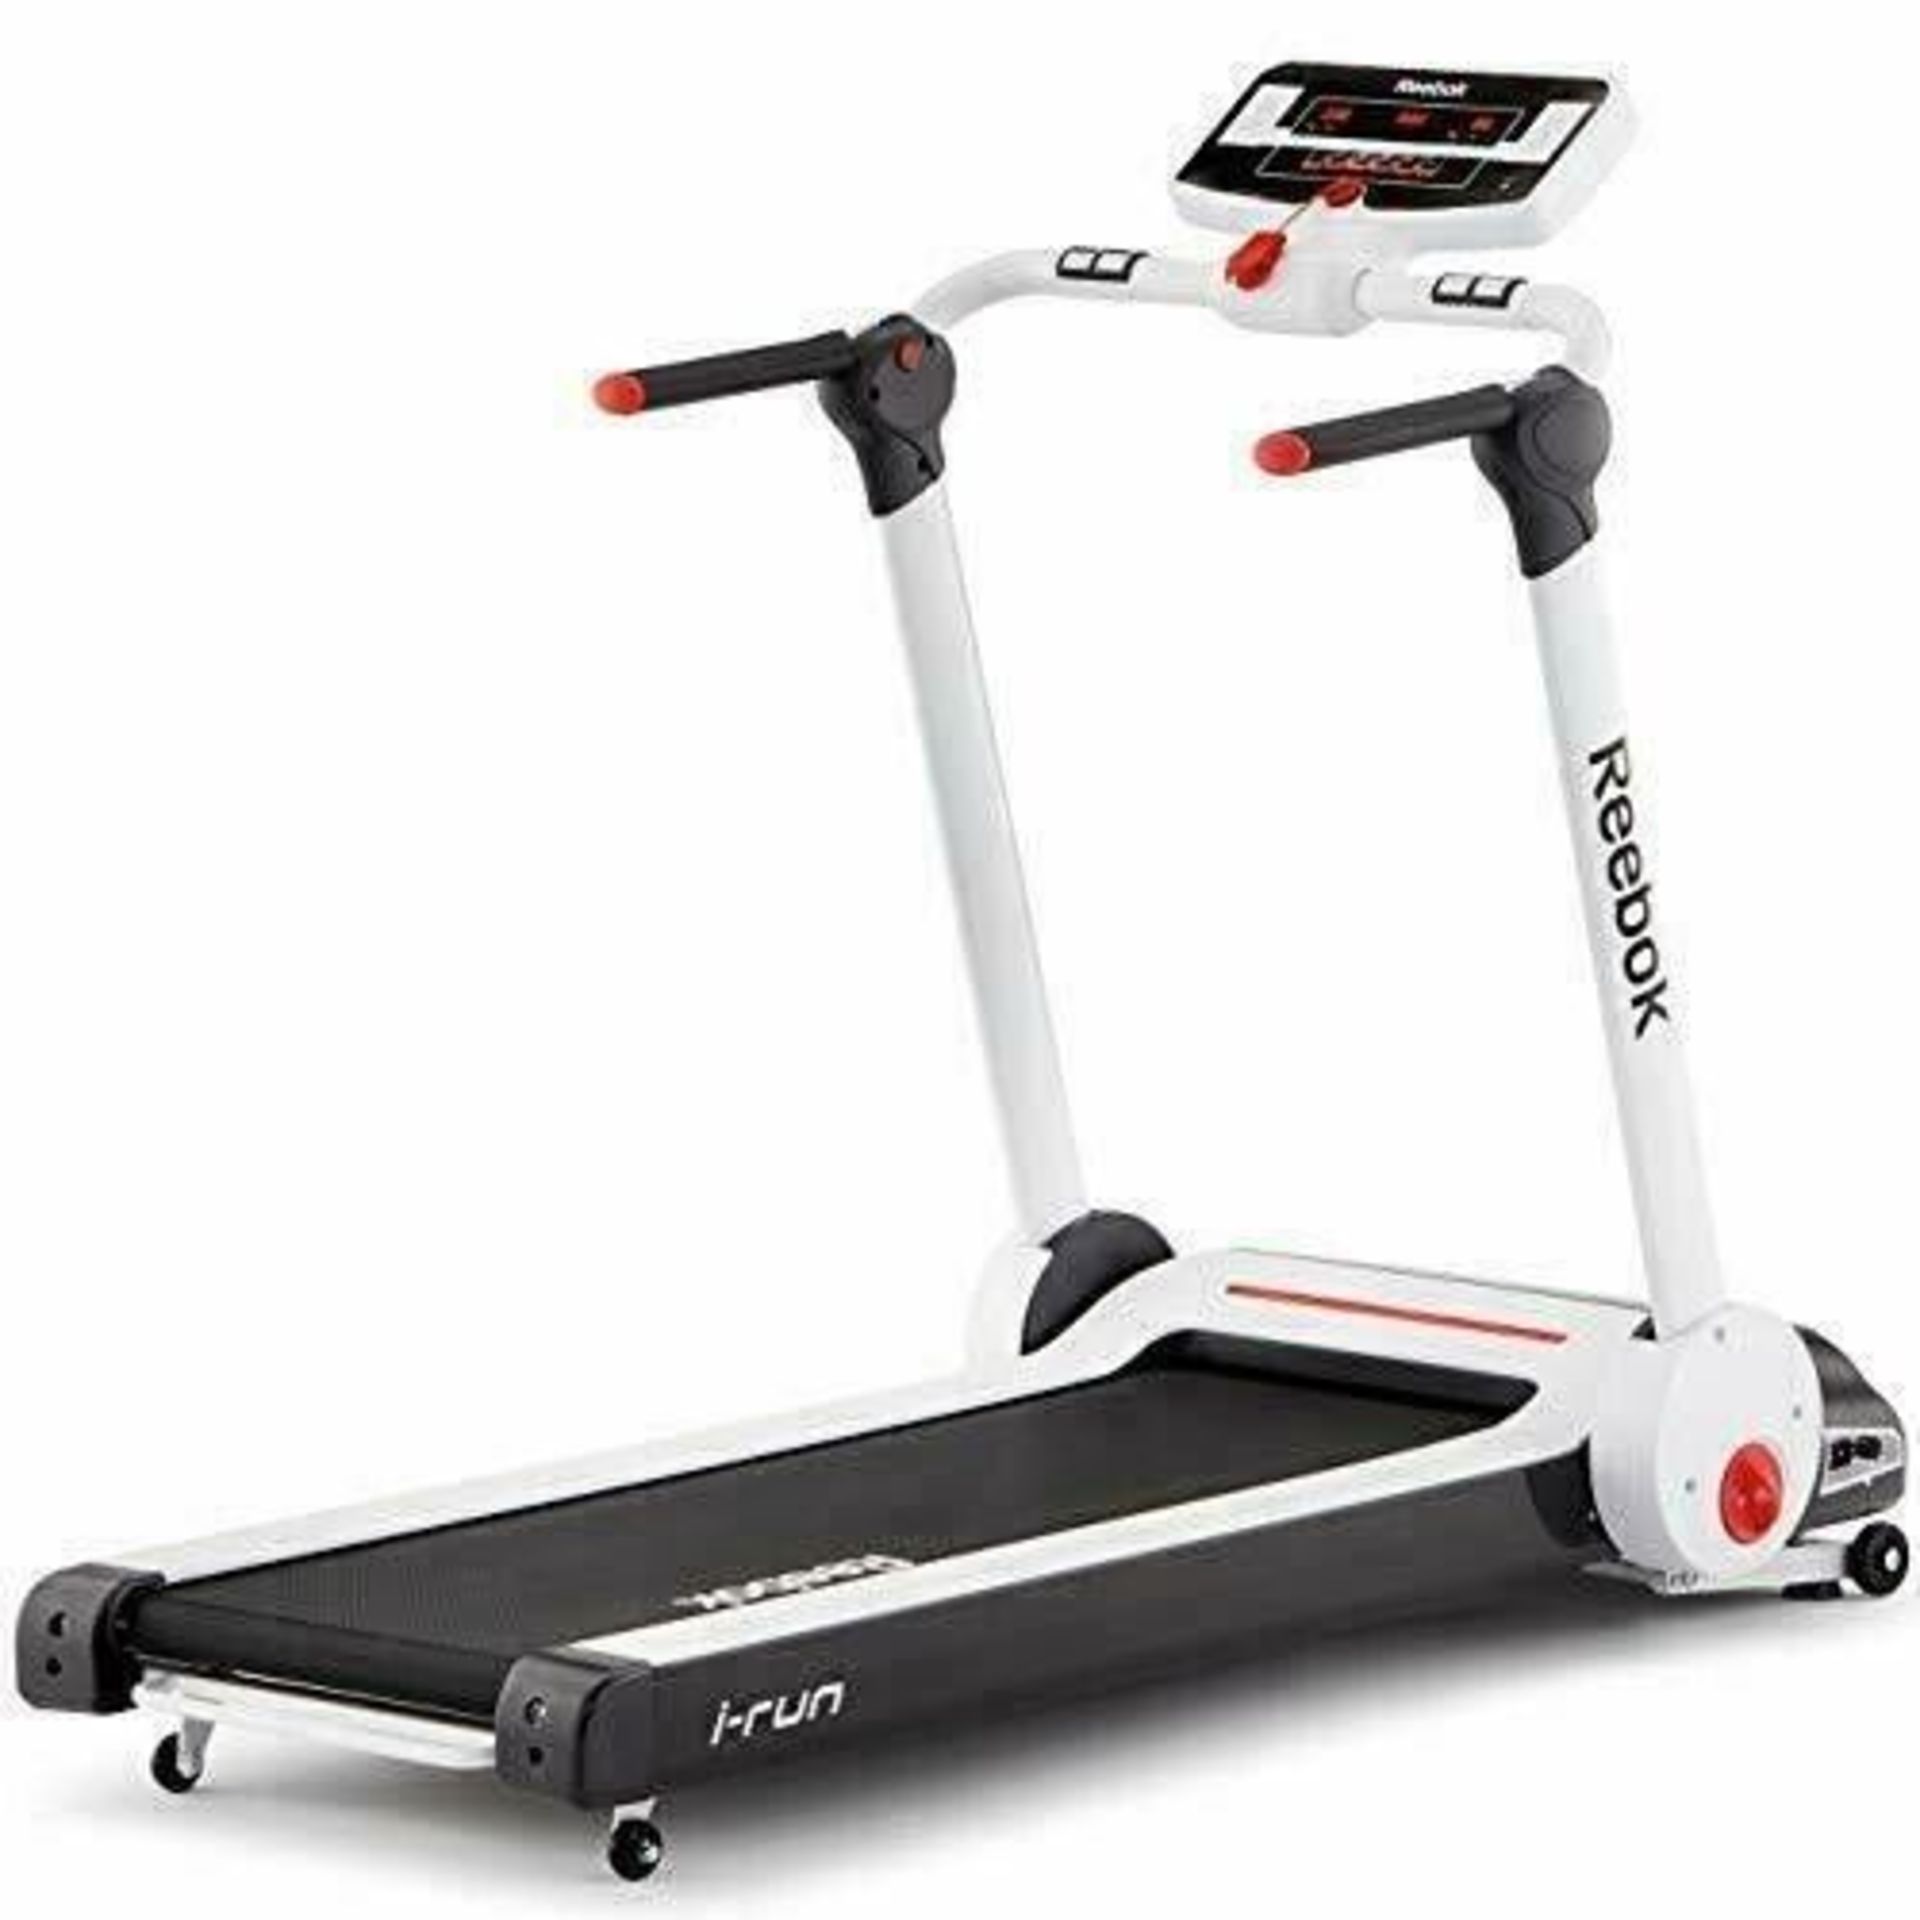 1 X BRAND NEW FACTORY SEALED REEBOK I-RUN 3.0 TREADMILL 22 IN WHITE GROSS WEIGHT 70.5KG (NOTE BOX